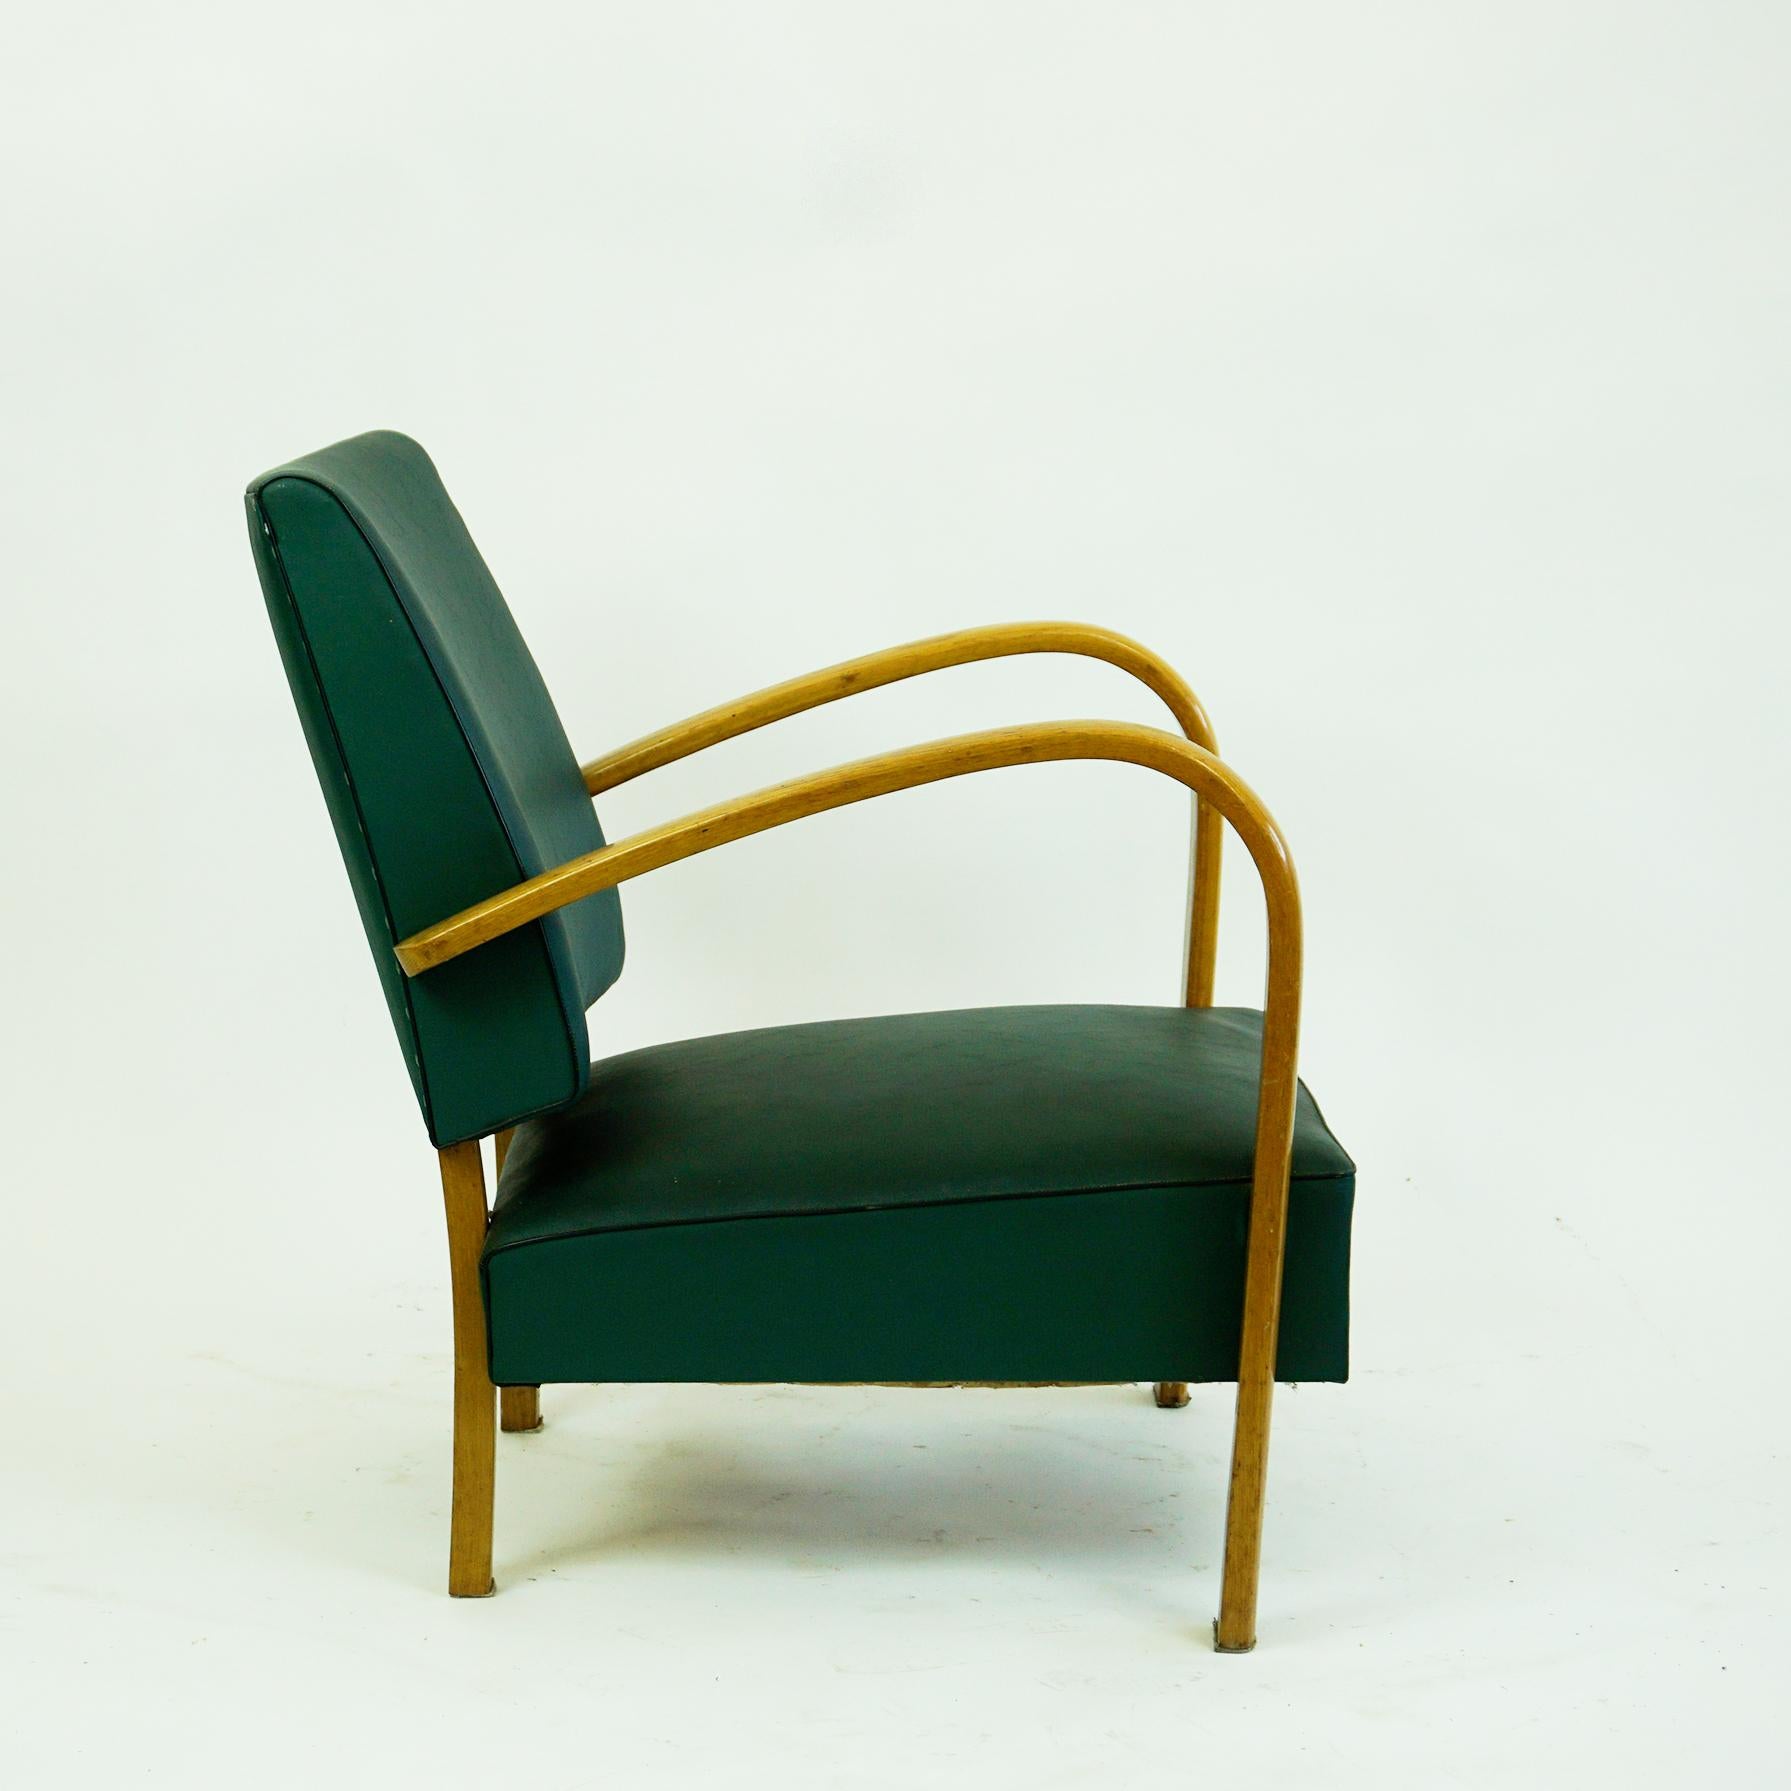 Mid-20th Century Italian Midcentury Beech Lounge Chair with Green Leatherette For Sale